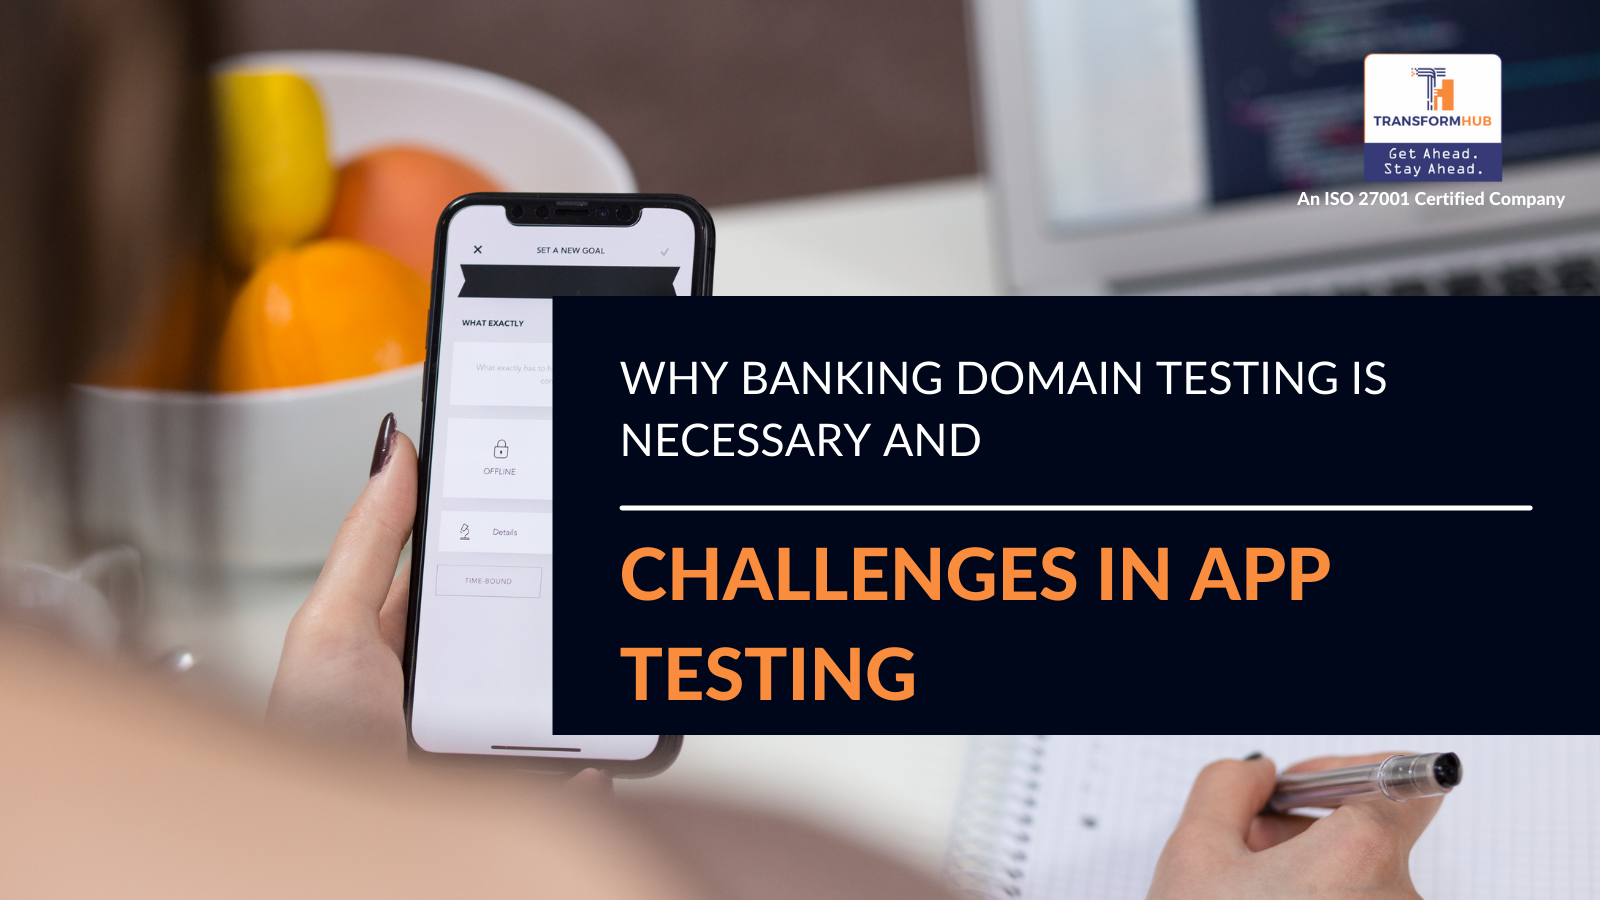 Why%20Banking%20Domain%20Testing%20Is%20Necessary%20and%20Challenges%20in%20App%20Testing%20in%20Banking%20Domain%20.png